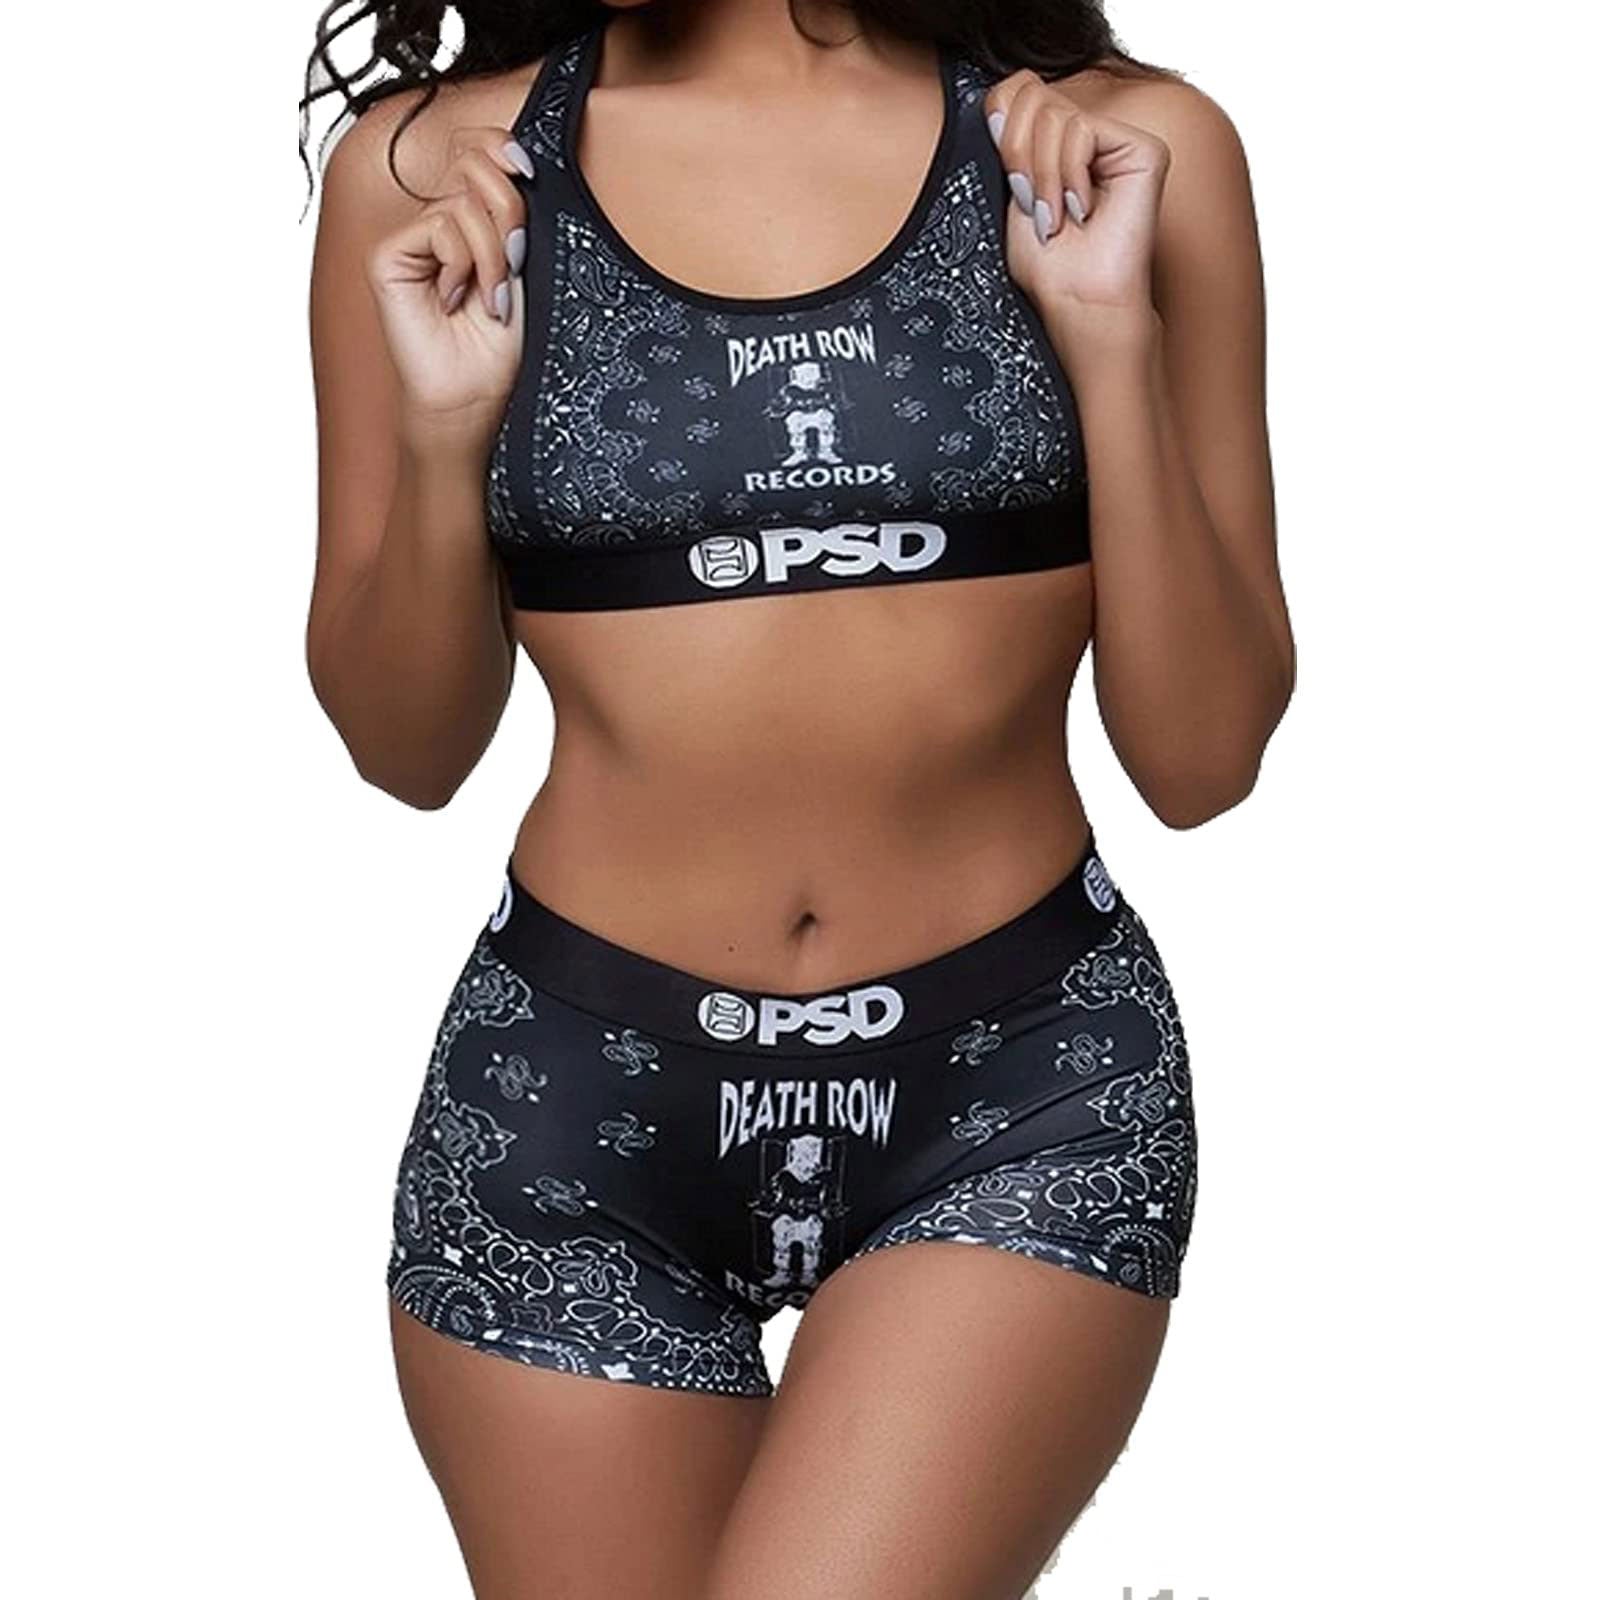 Psd womens boxers 